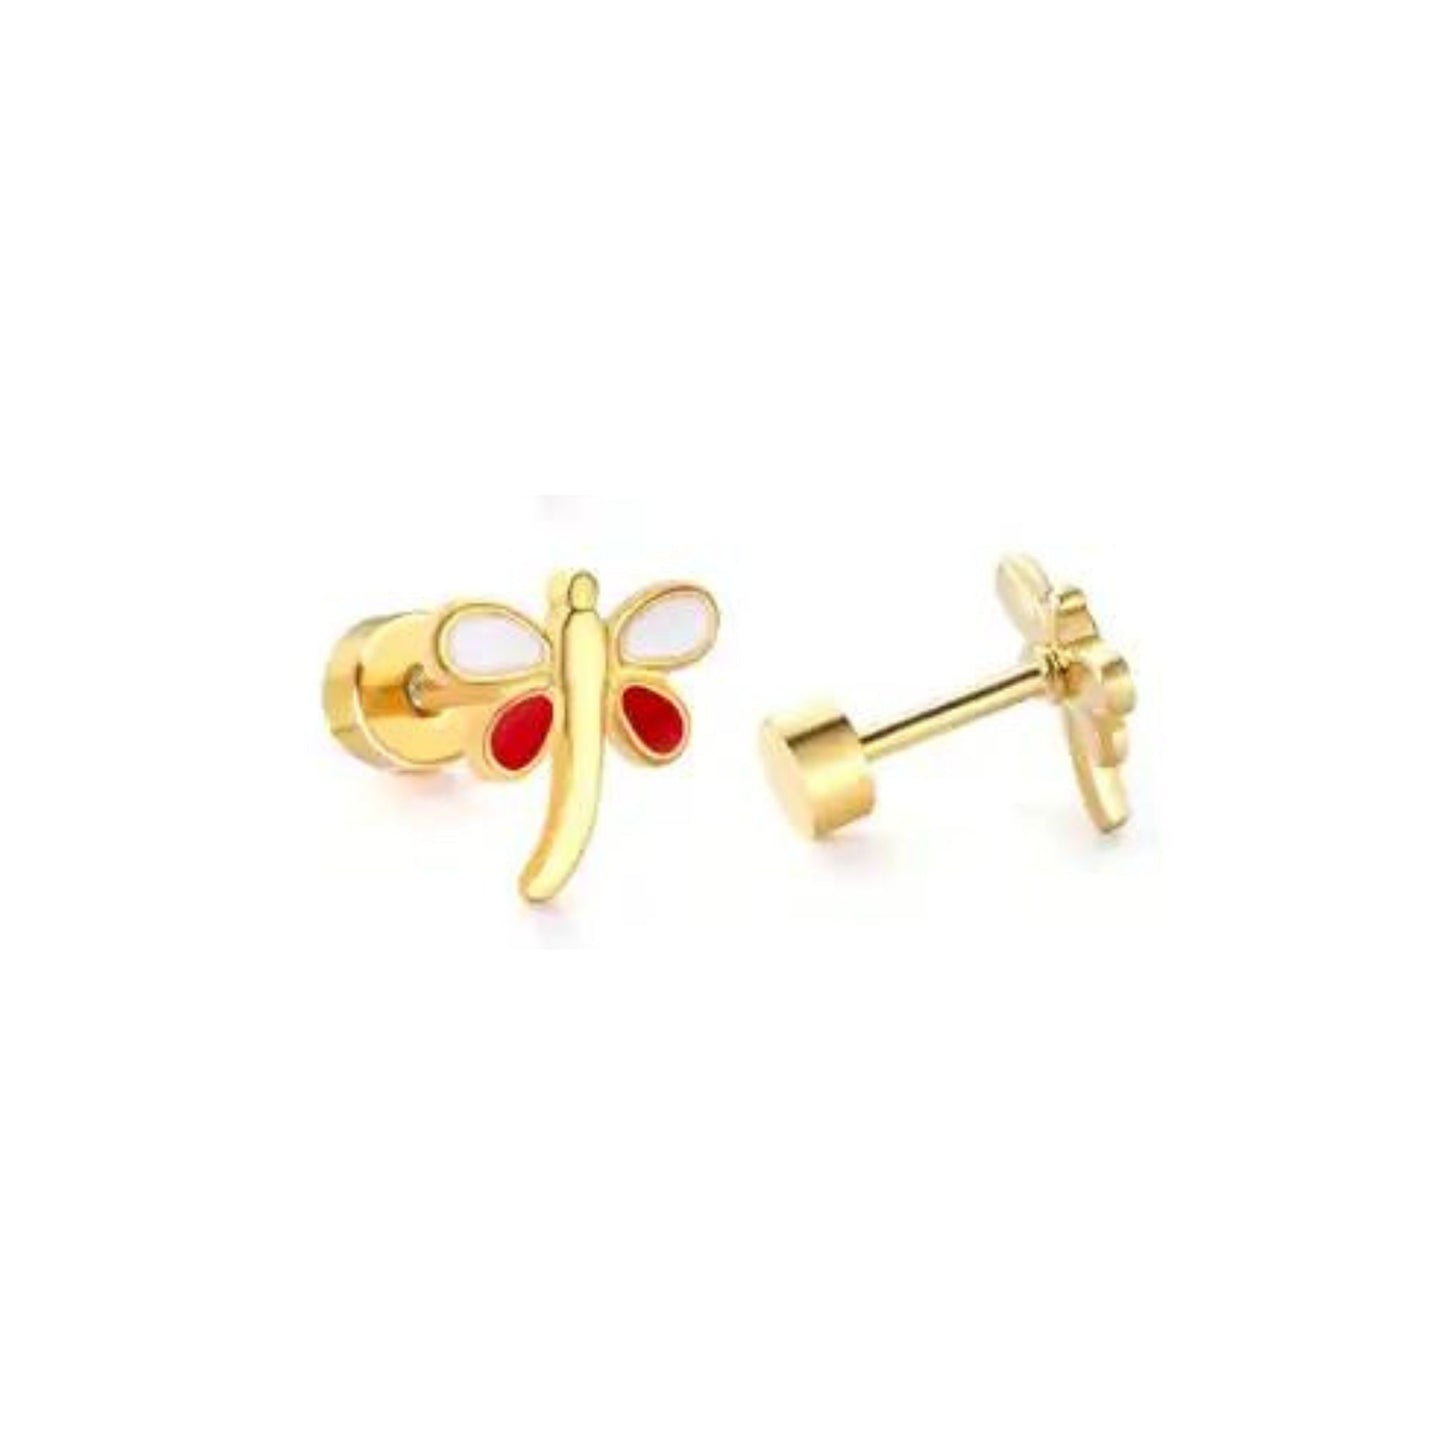 Flatback Stud - Bri Butterfly - White and Red